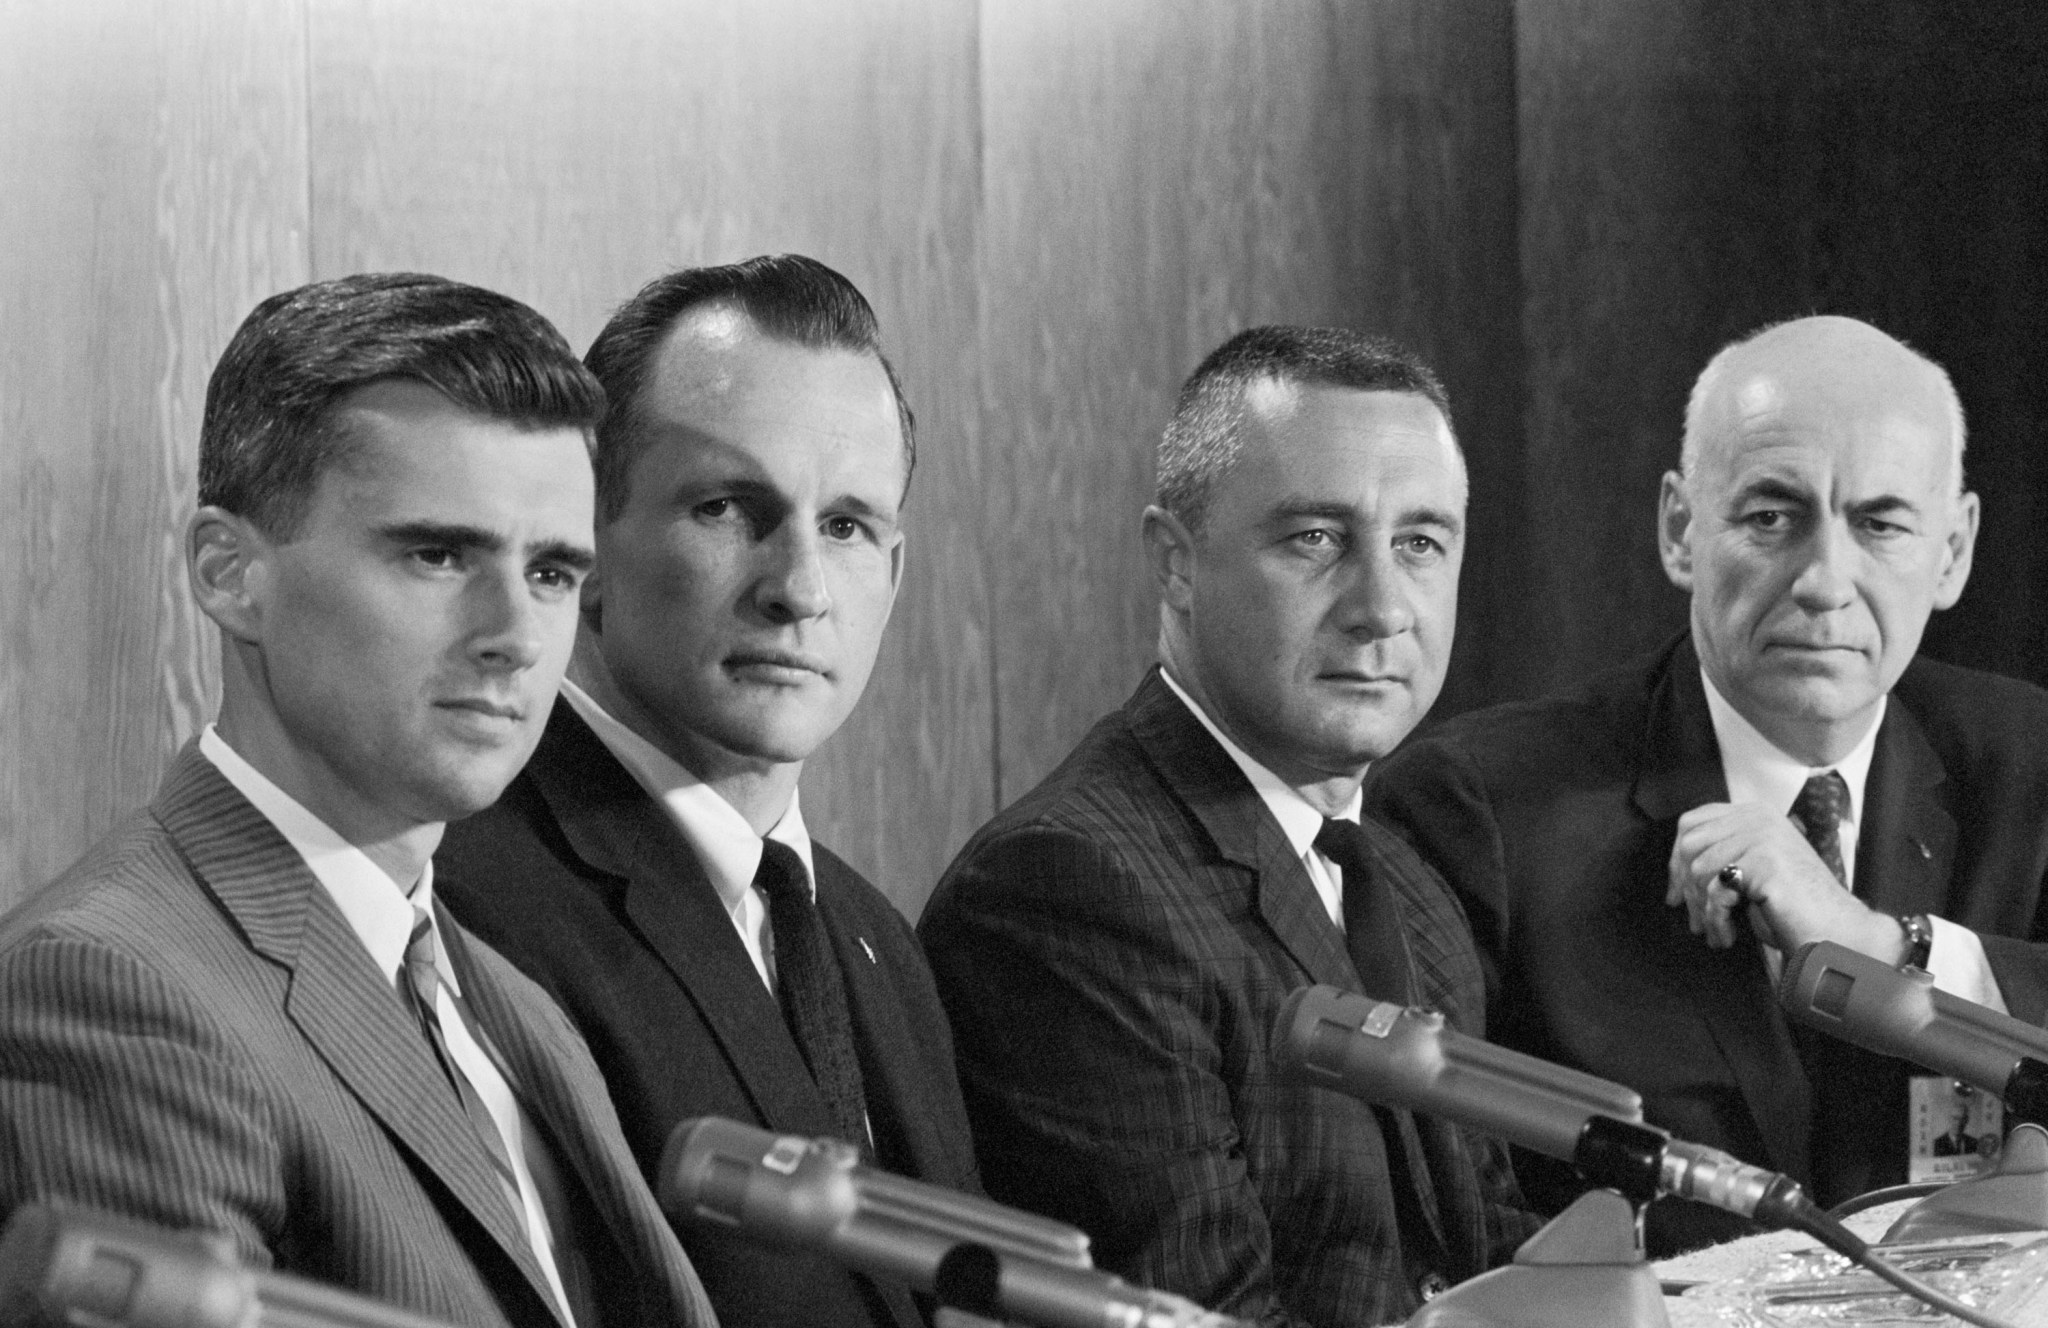 Manned Spacecraft Center Director Robert R. Gilruth (far right) introduces the Apollo 1 crew during press conference in Houston. Sitting next to Gilruth are (from left) astronauts Roger Chaffee, Edward H. White II, and Gus Grissom. (1966)